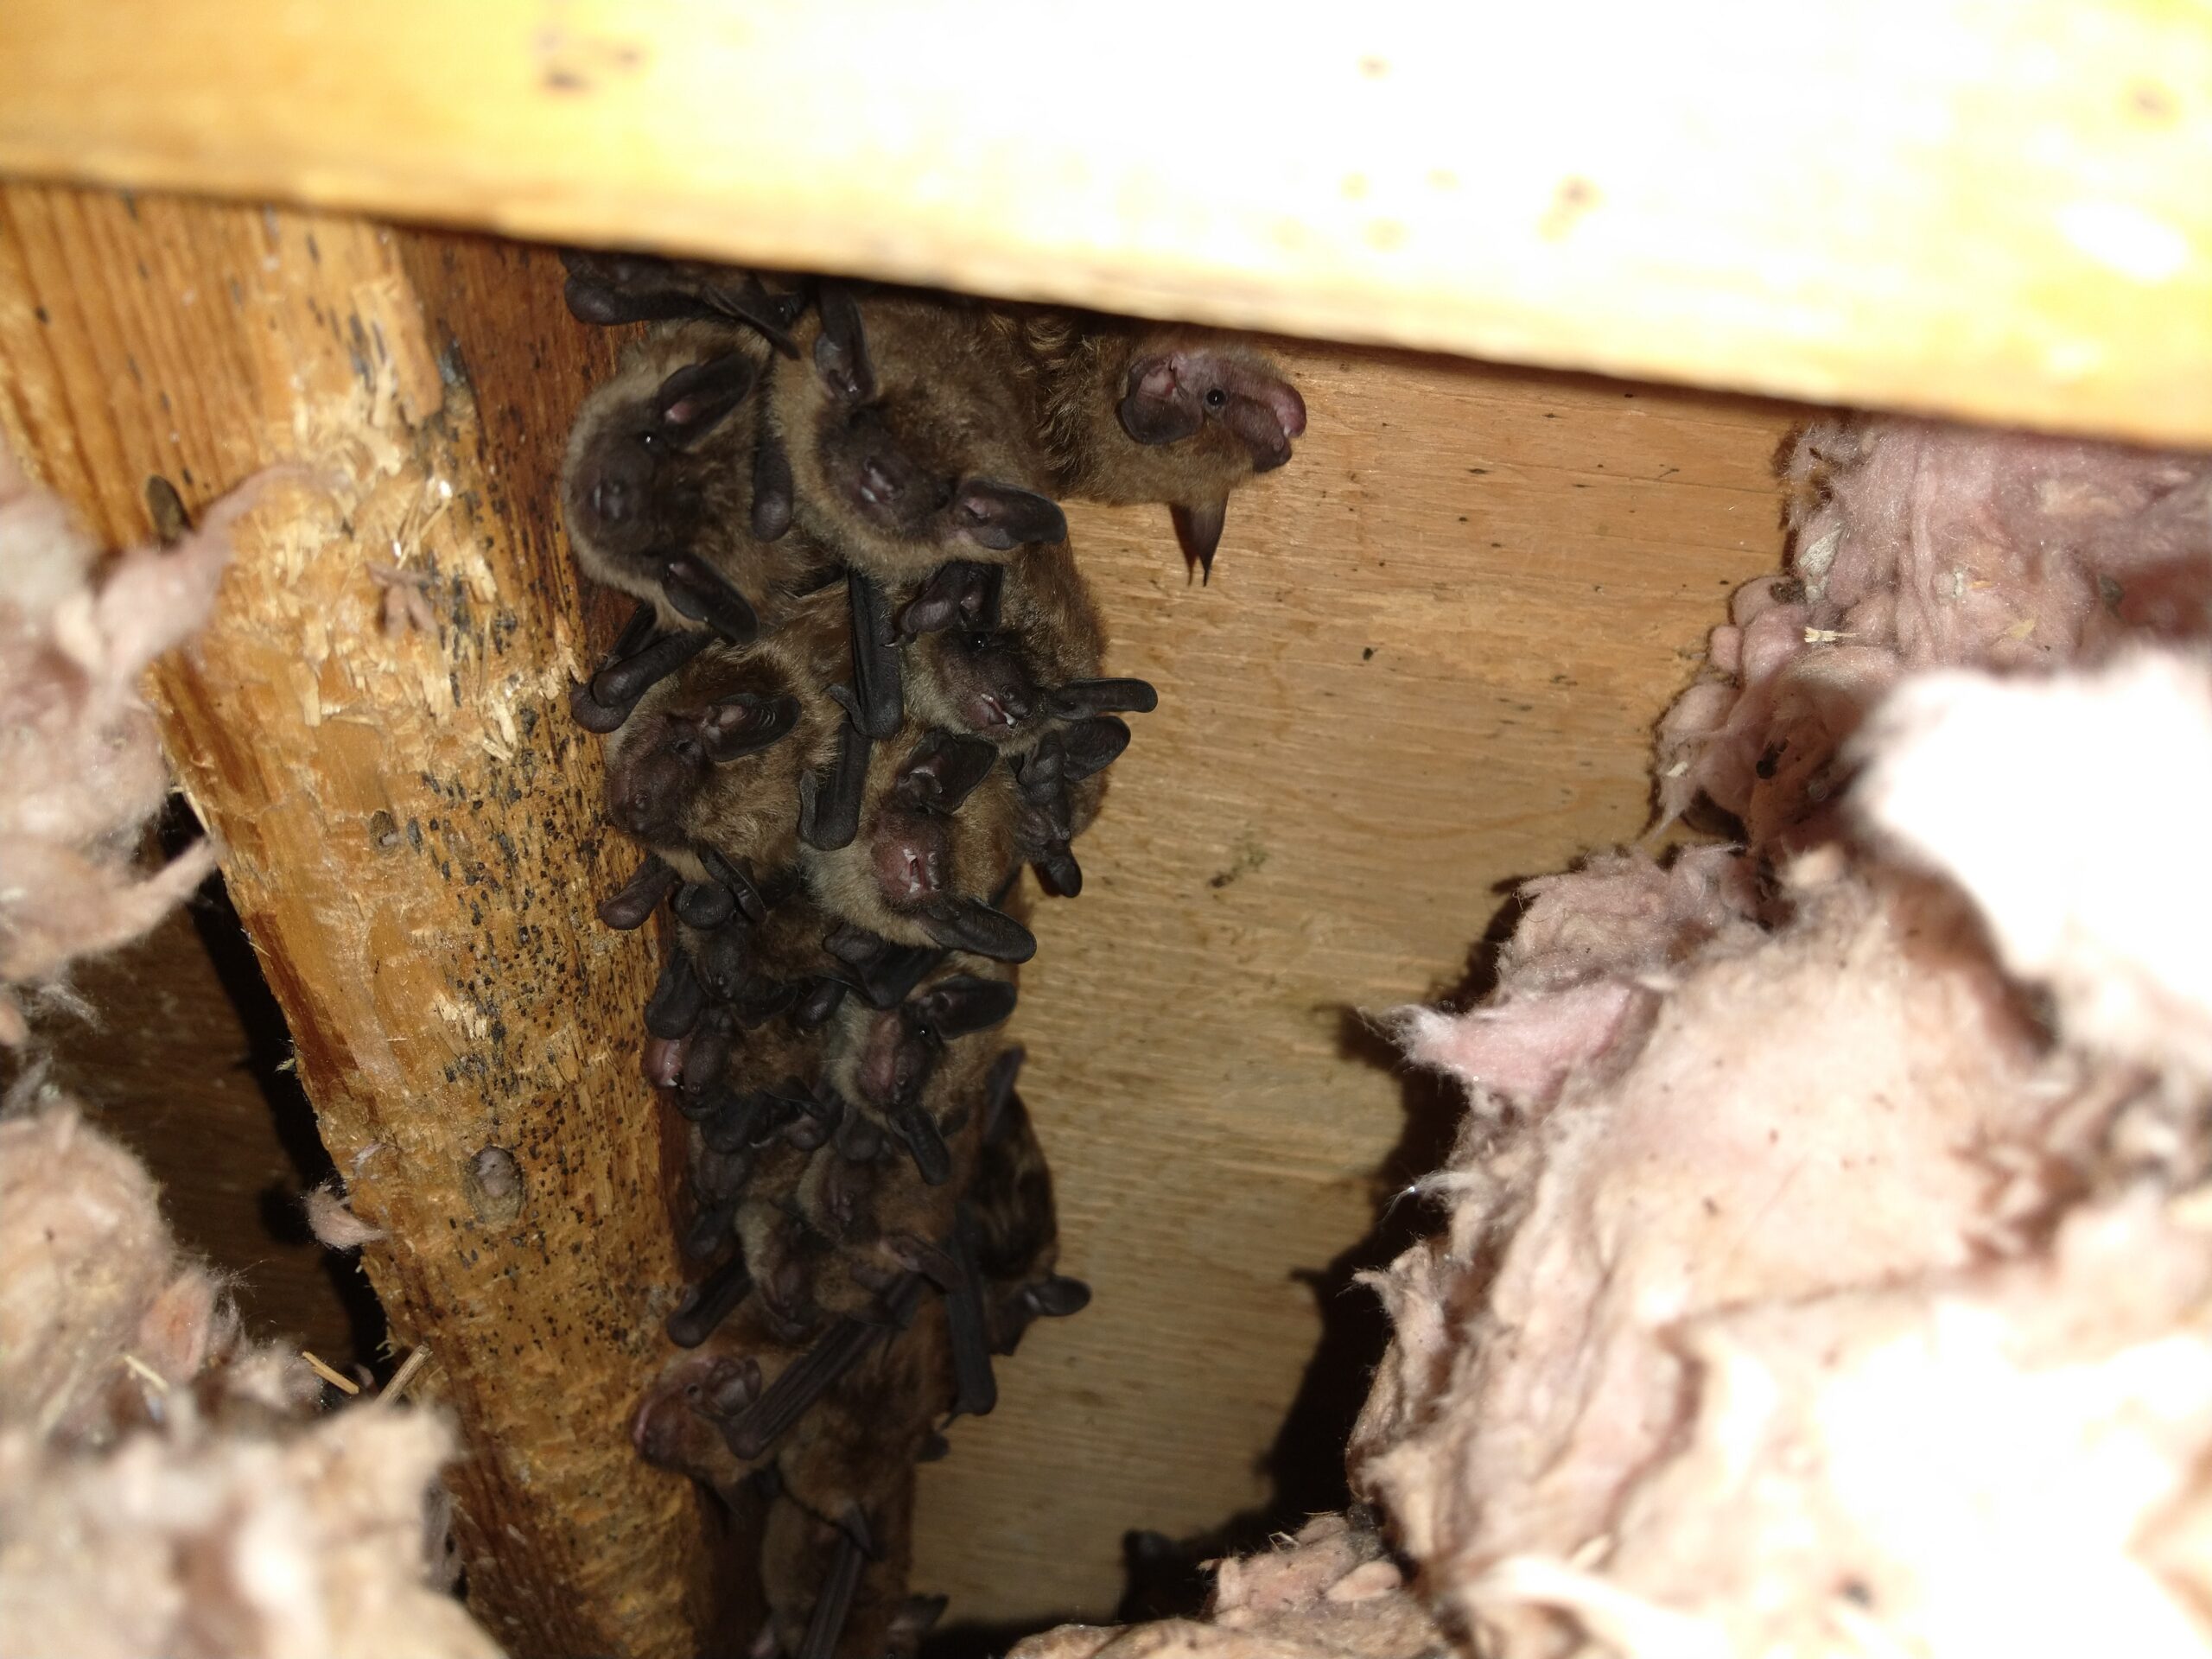 Ottawa Wildlife Removal: How to Get Bats Out of the Wall?